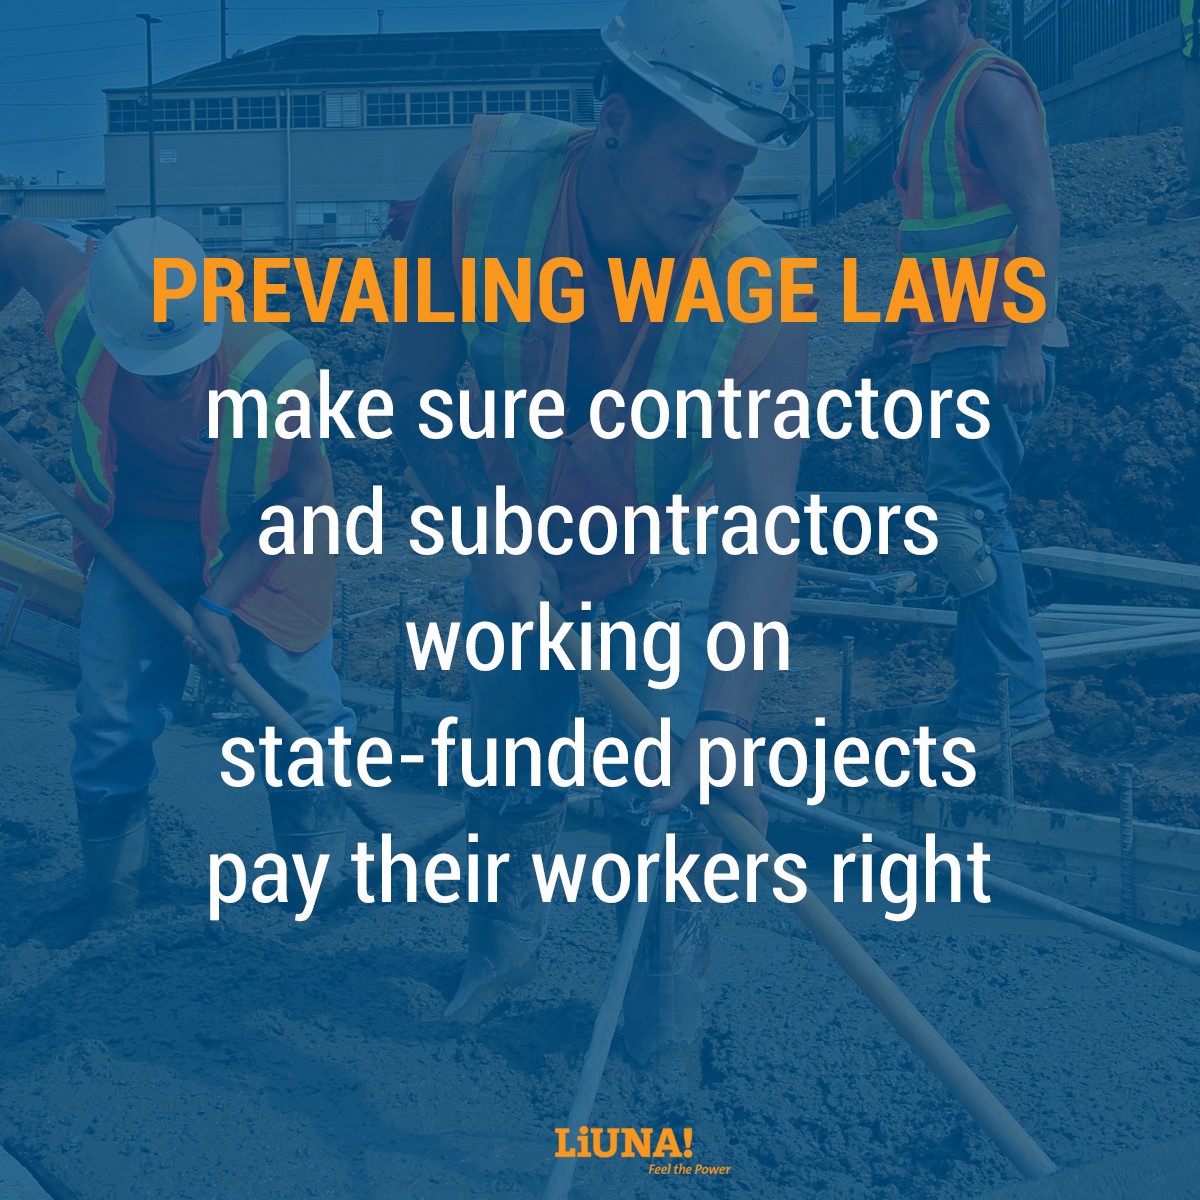 Employers who oppose #prevailingwages do so because they want to cut workers’ paychecks and
pocket the pay-cuts as profits.

#protectprevailingwage
#LiUNABuilds
#FeelThePower